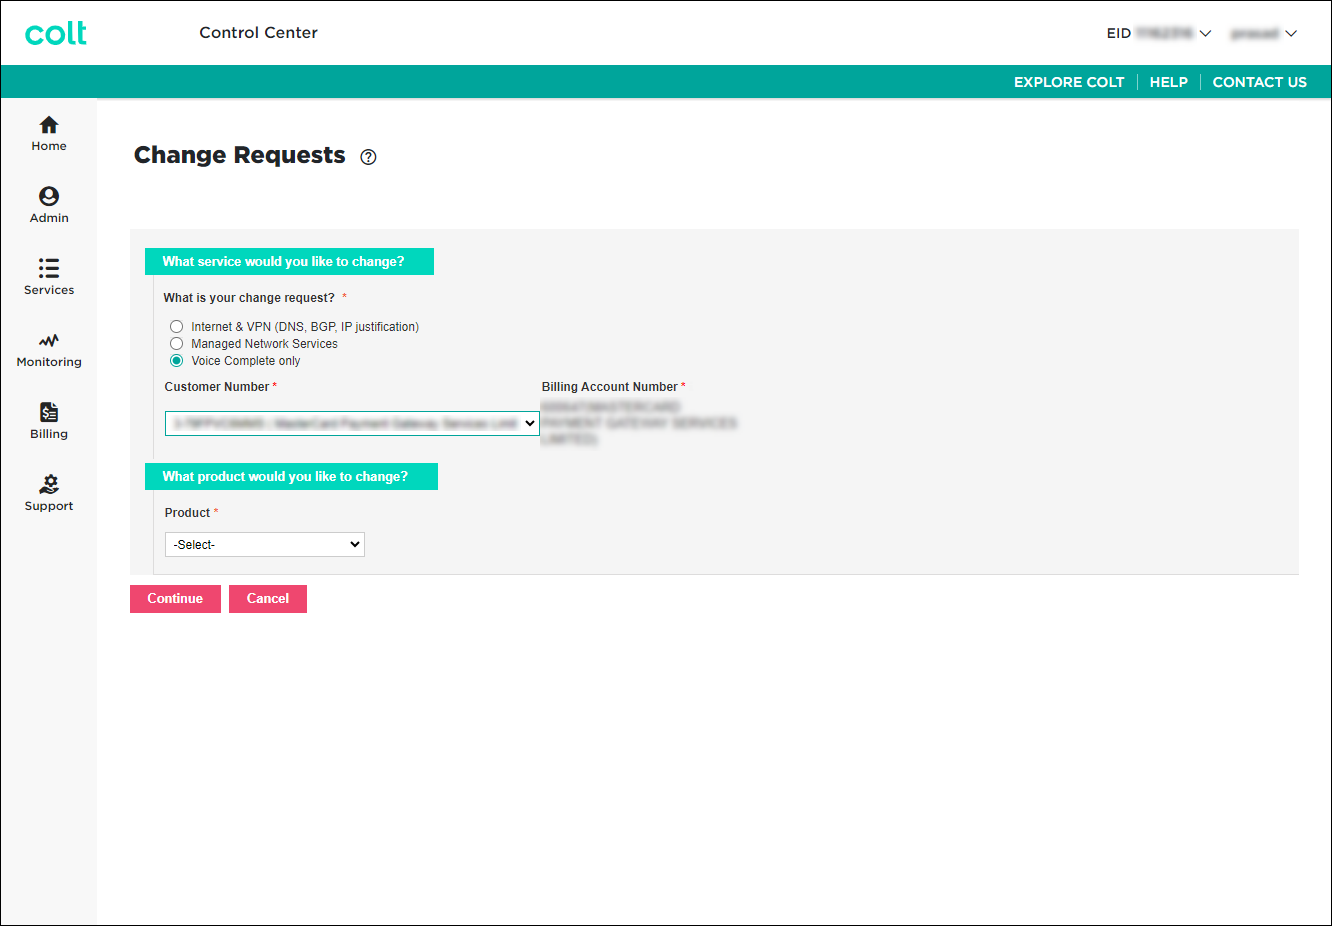 Change Requests (New Change Request for Voice Complete with customer number and billing account selected)